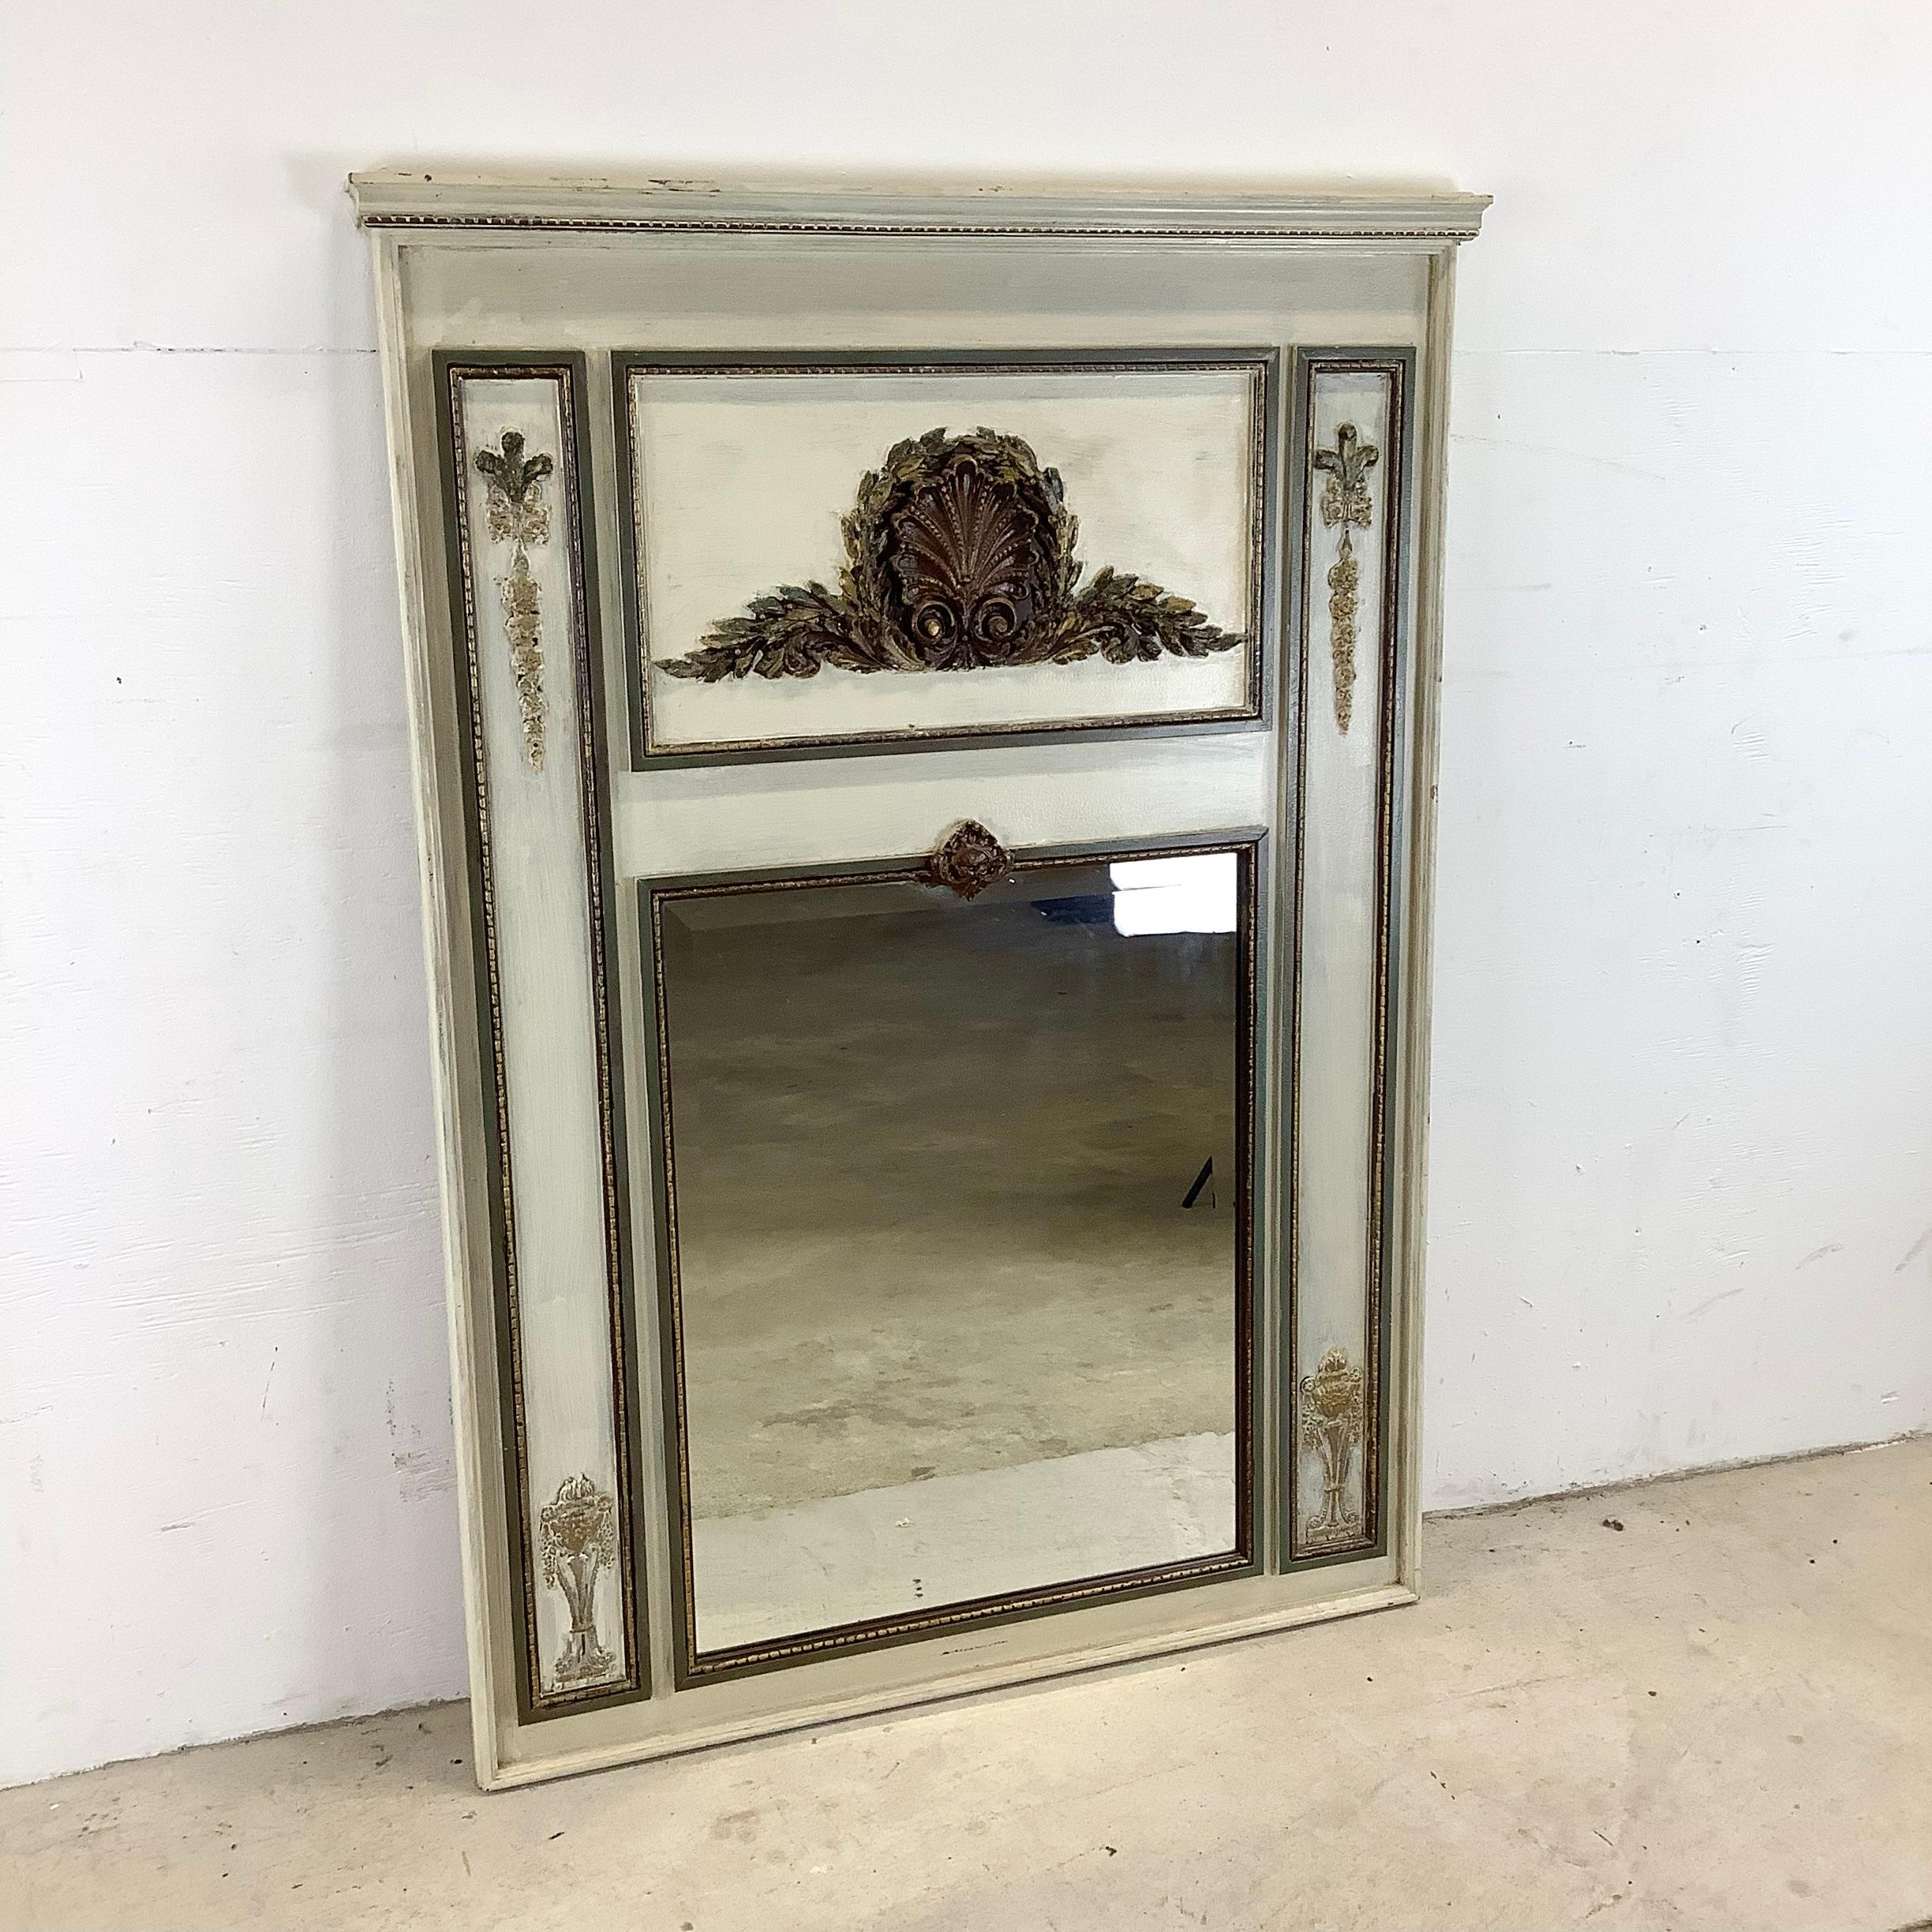 This striking vintage regency trumeau mirror makes a tremendous centerpiece to any setting, with ornate carved detail and painted finish. The french country style of the detailed wooden frame make this ready to hang trumeau mirror a perfect addition